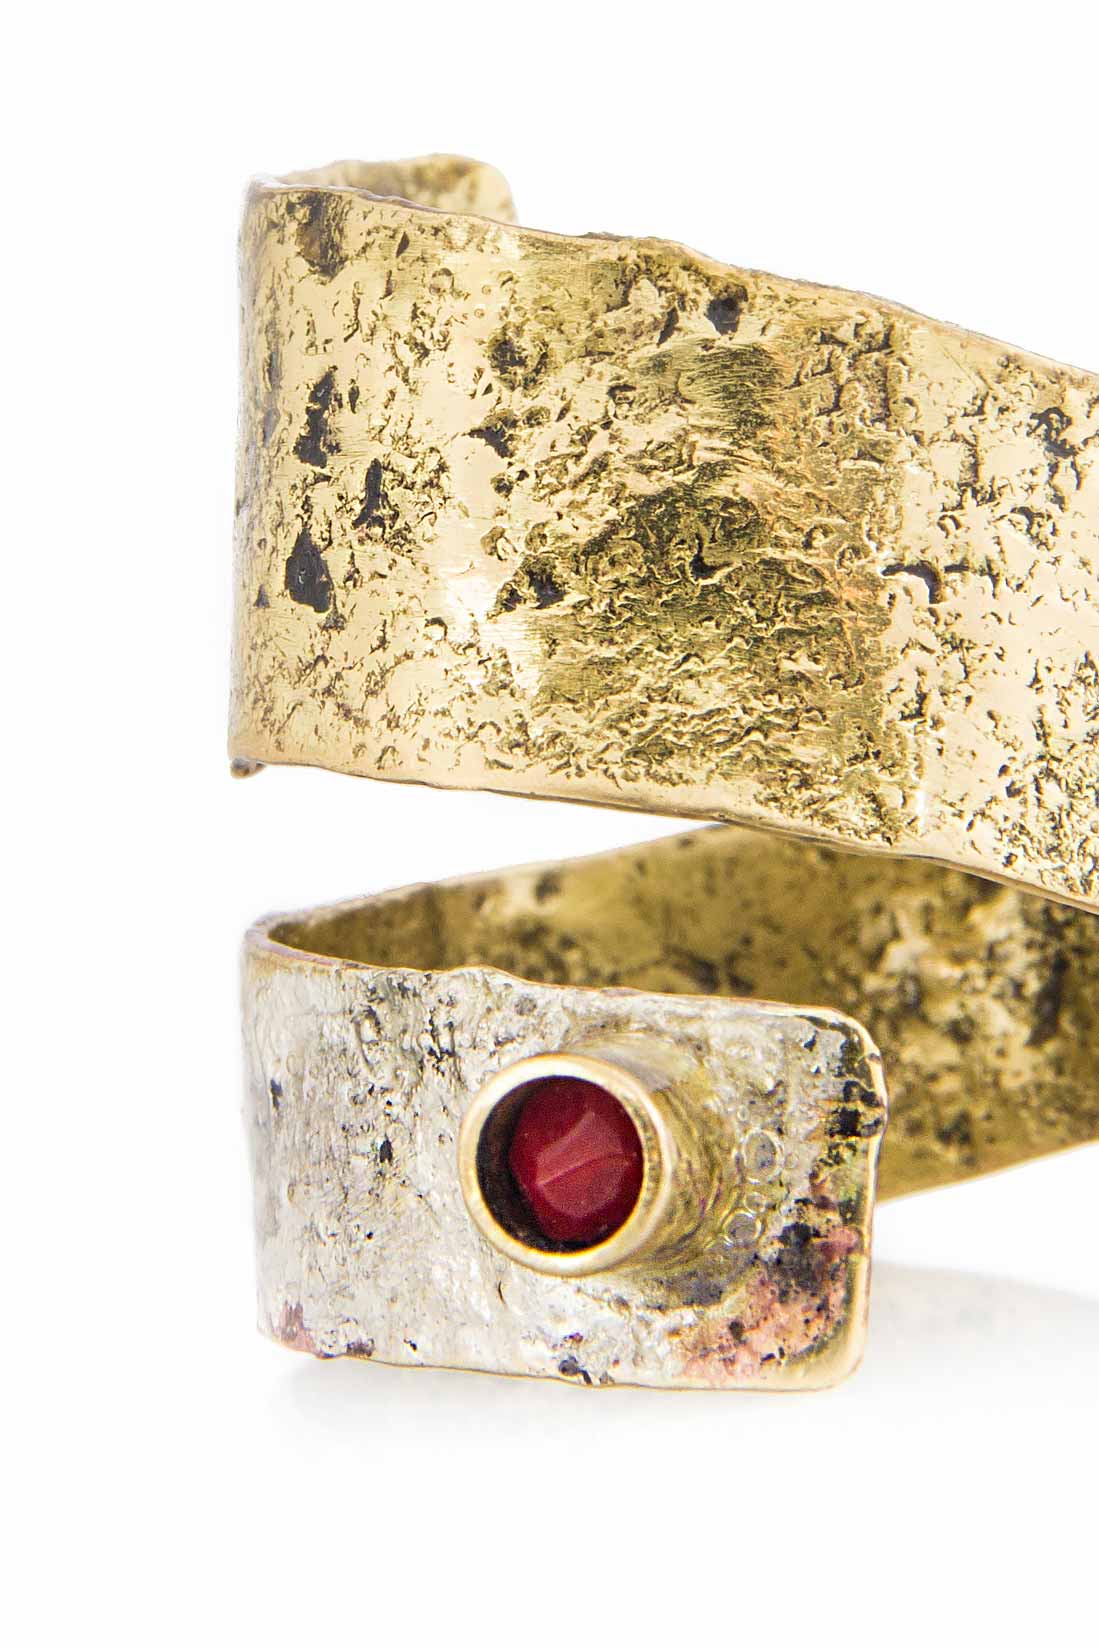 Silver and brass ring with red coral stone Eneada image 3